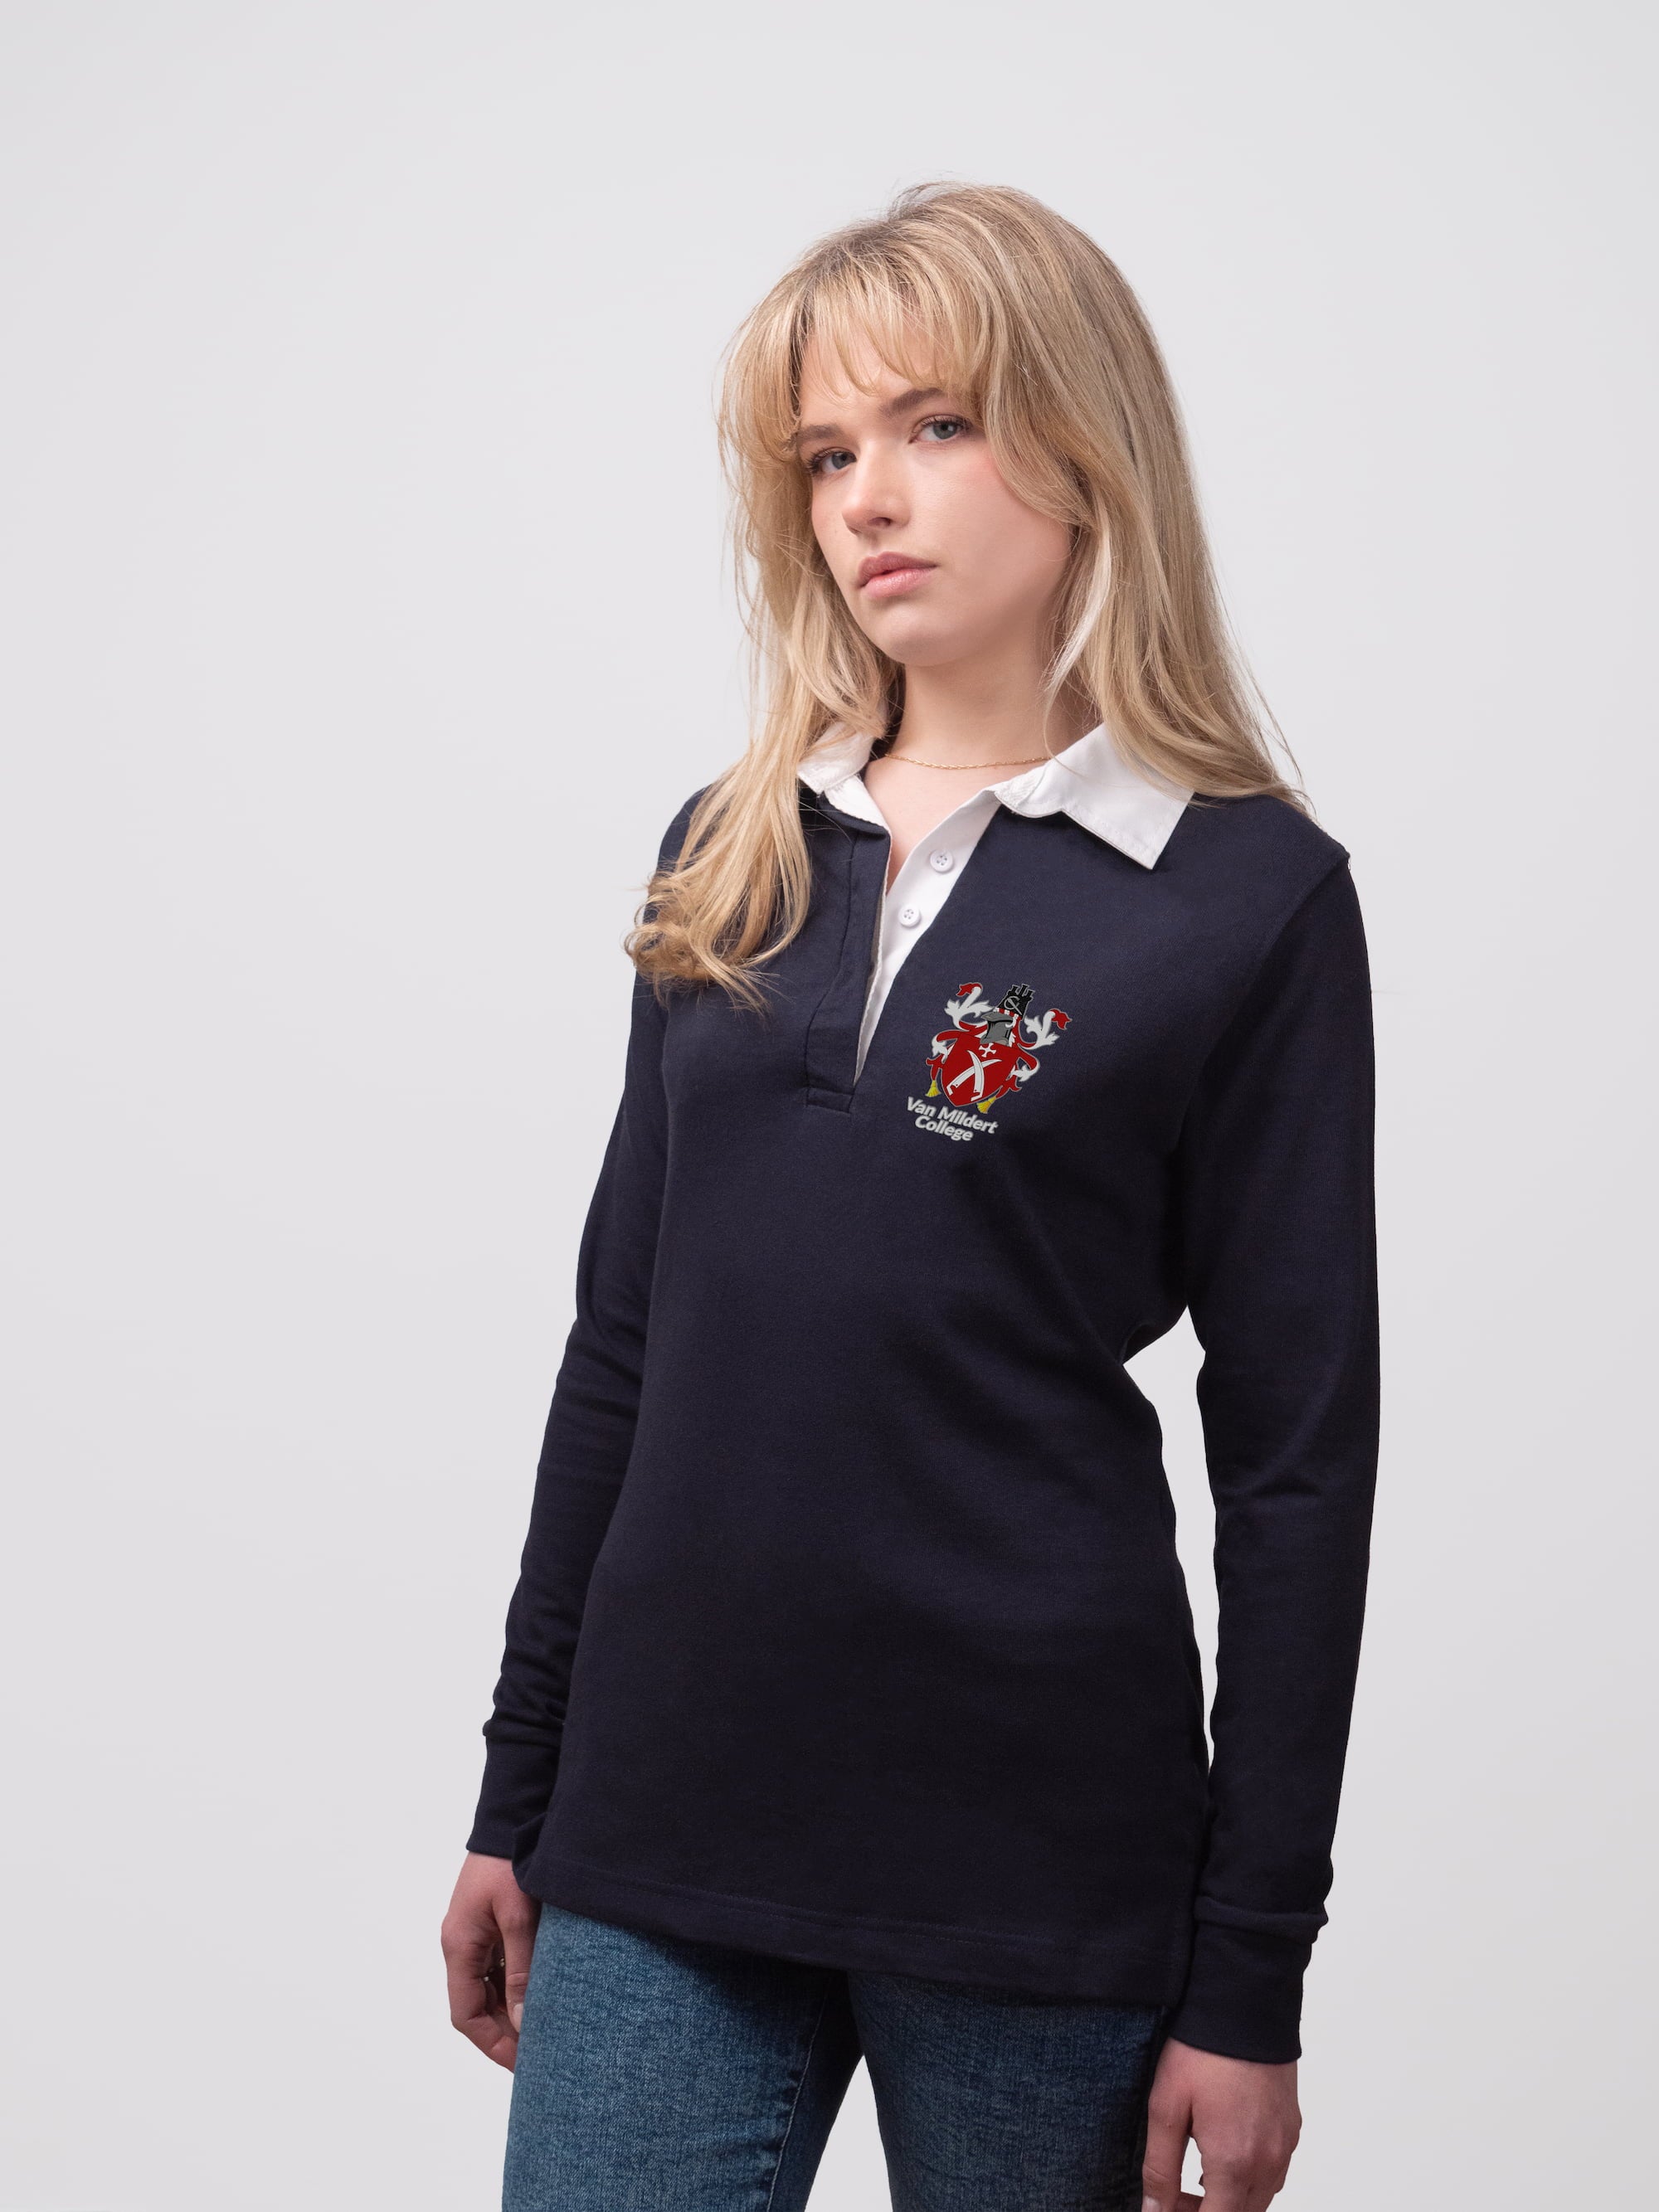 Student wearing a navy Van Mildert College rugby shirt with embroidered crest